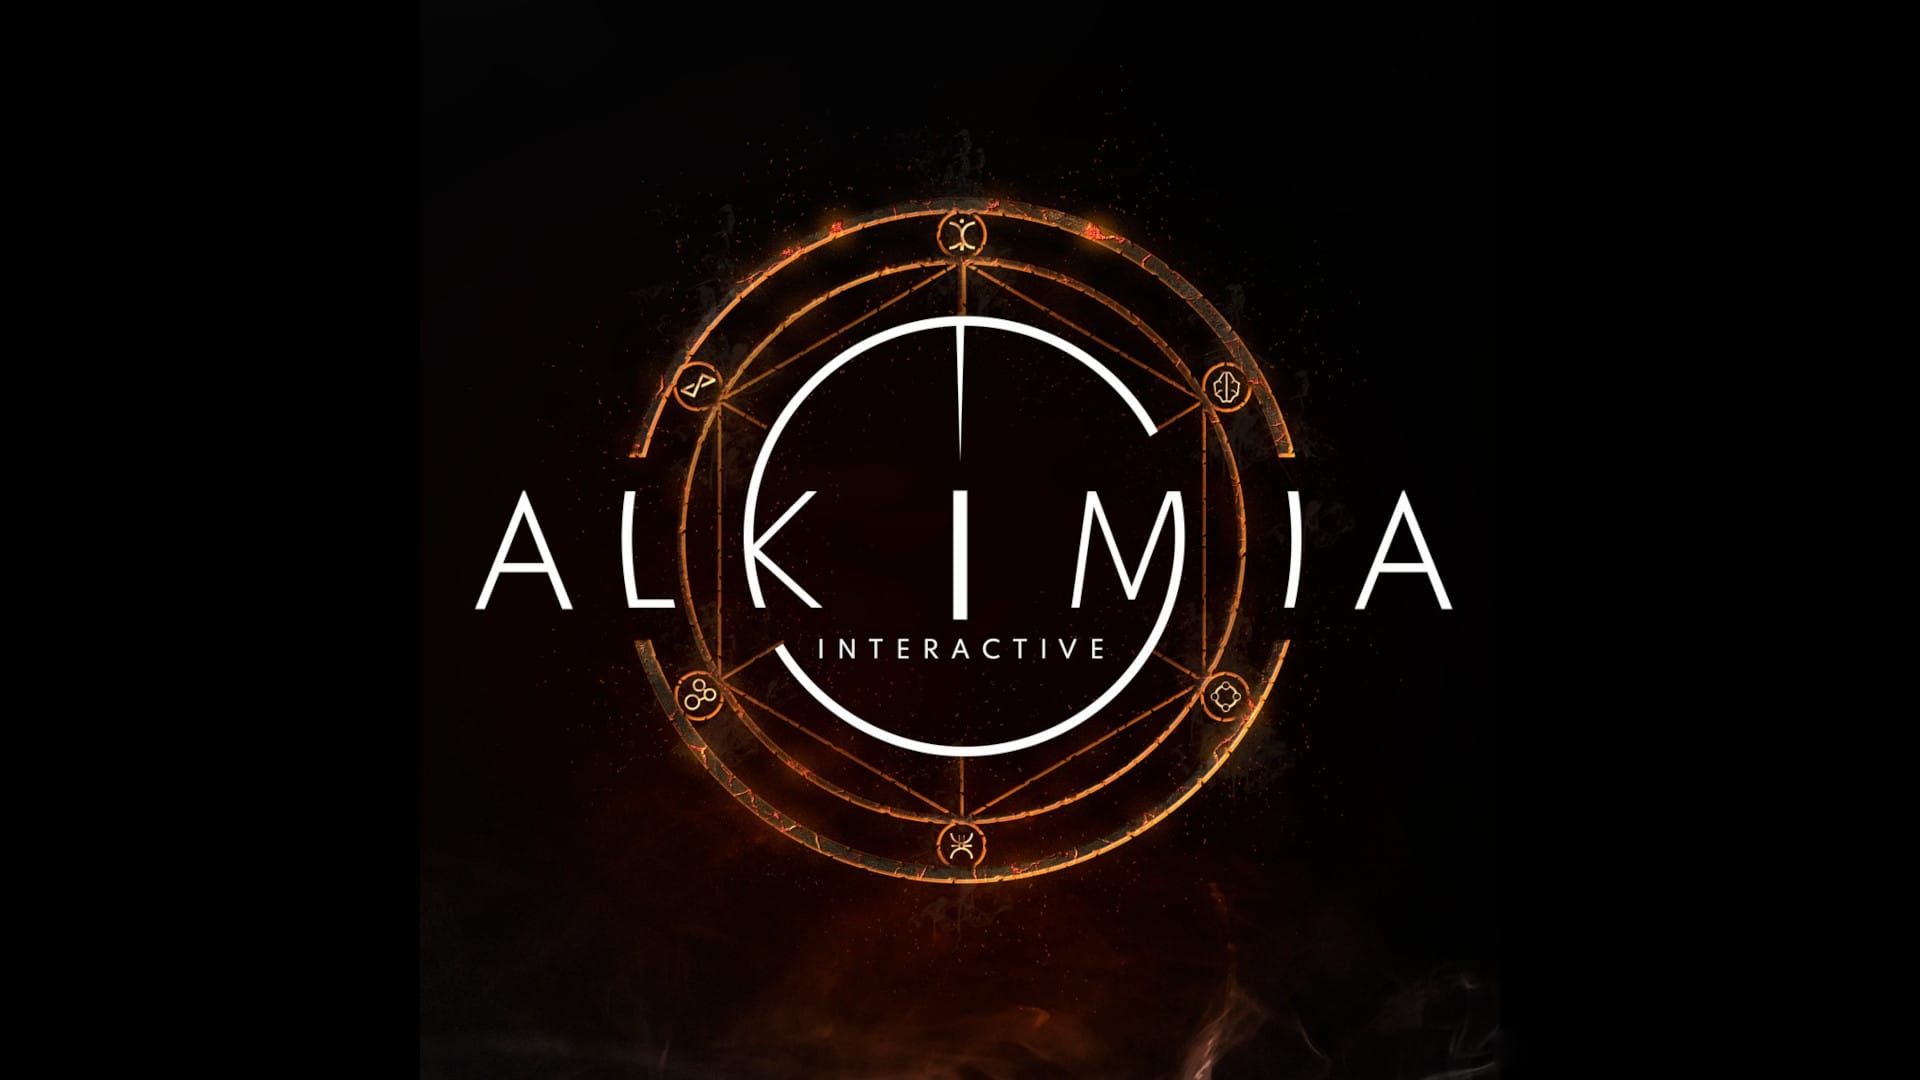 The logo for Alkimia Interactive, the new studio working on the Gothic remake